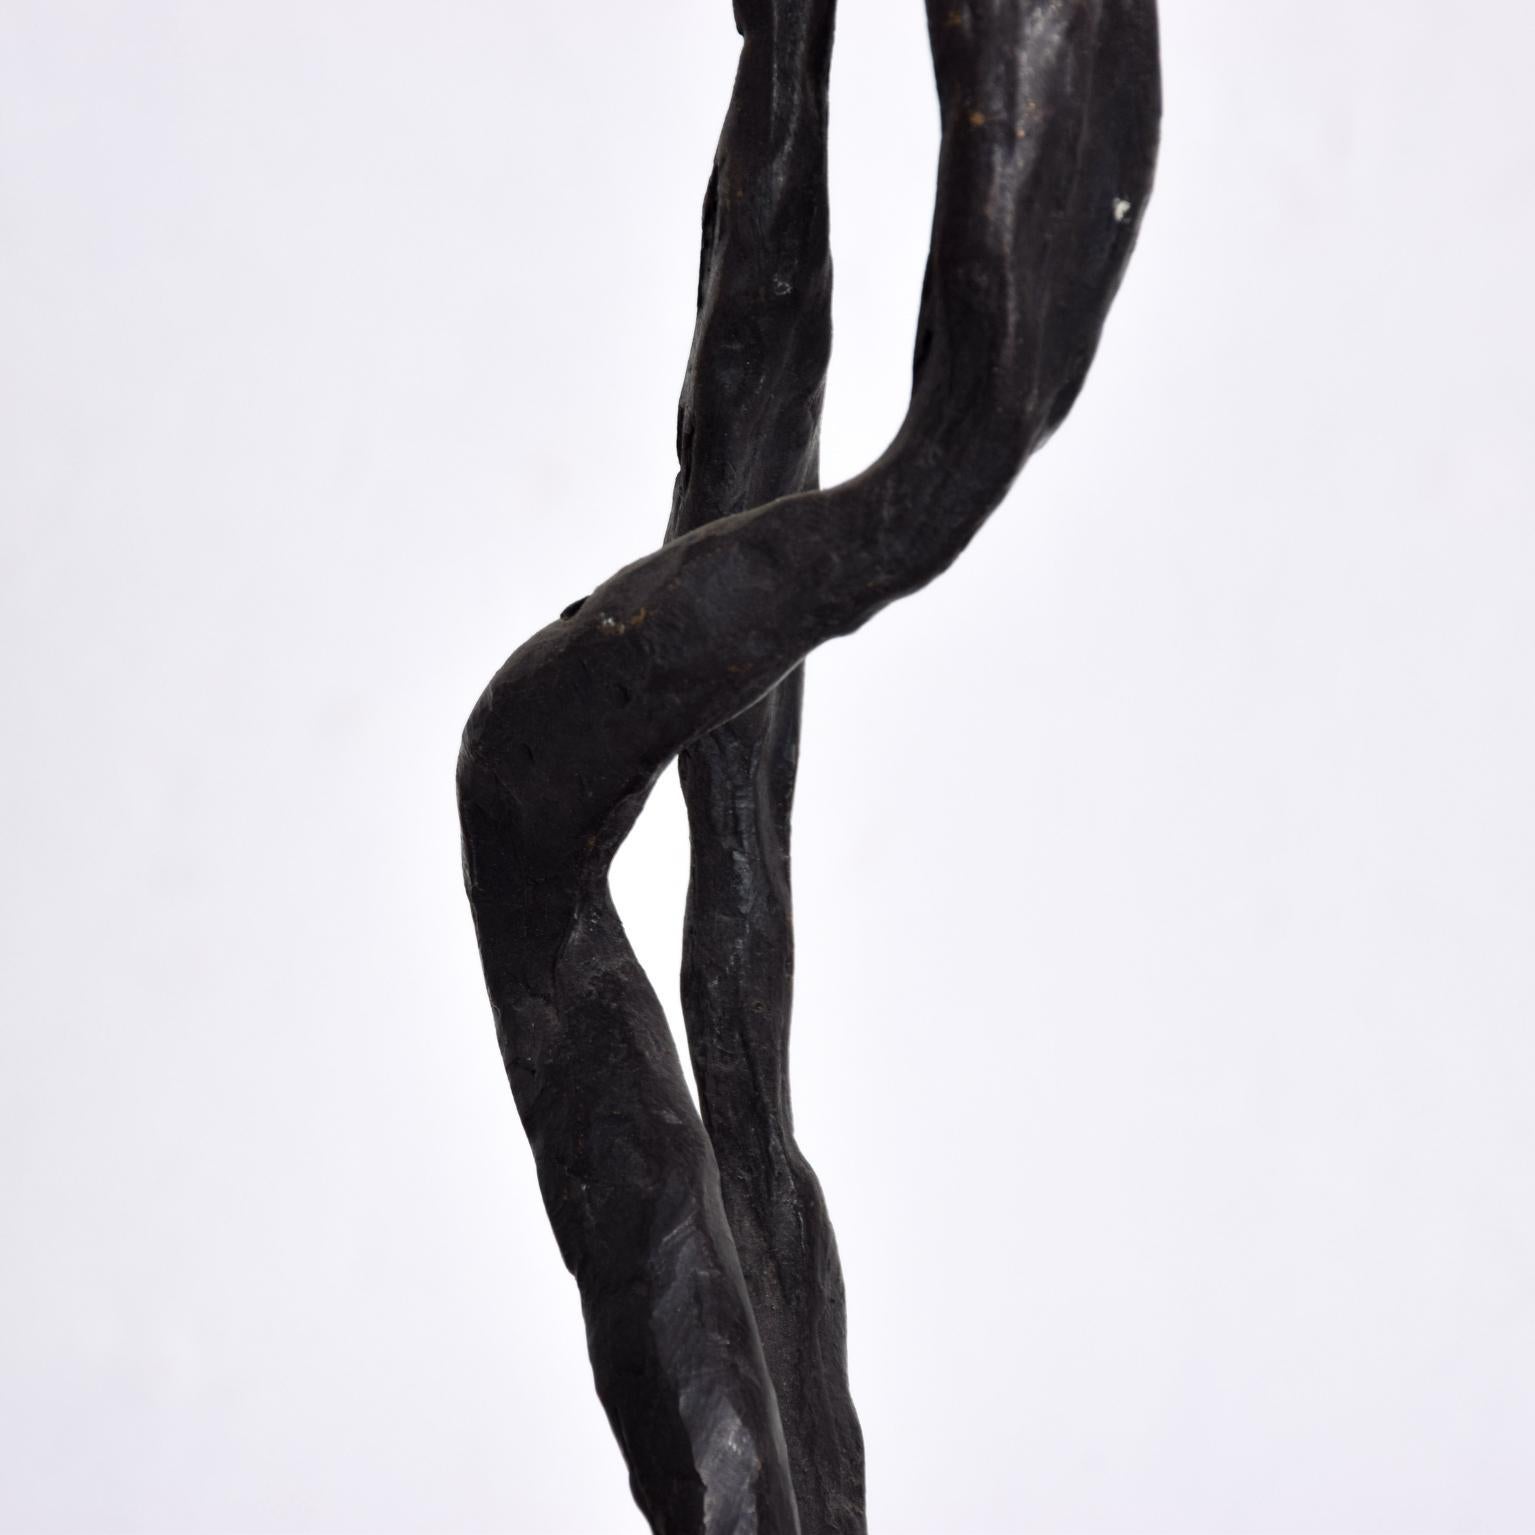 We are pleased to offer for your consideration, an Abstract Sculpture, Signed on the bottom, Ollin Kan, B Canfield 08.
Cast bronze. Original patina. Abstract figure.
Dimensions: 13 3/4